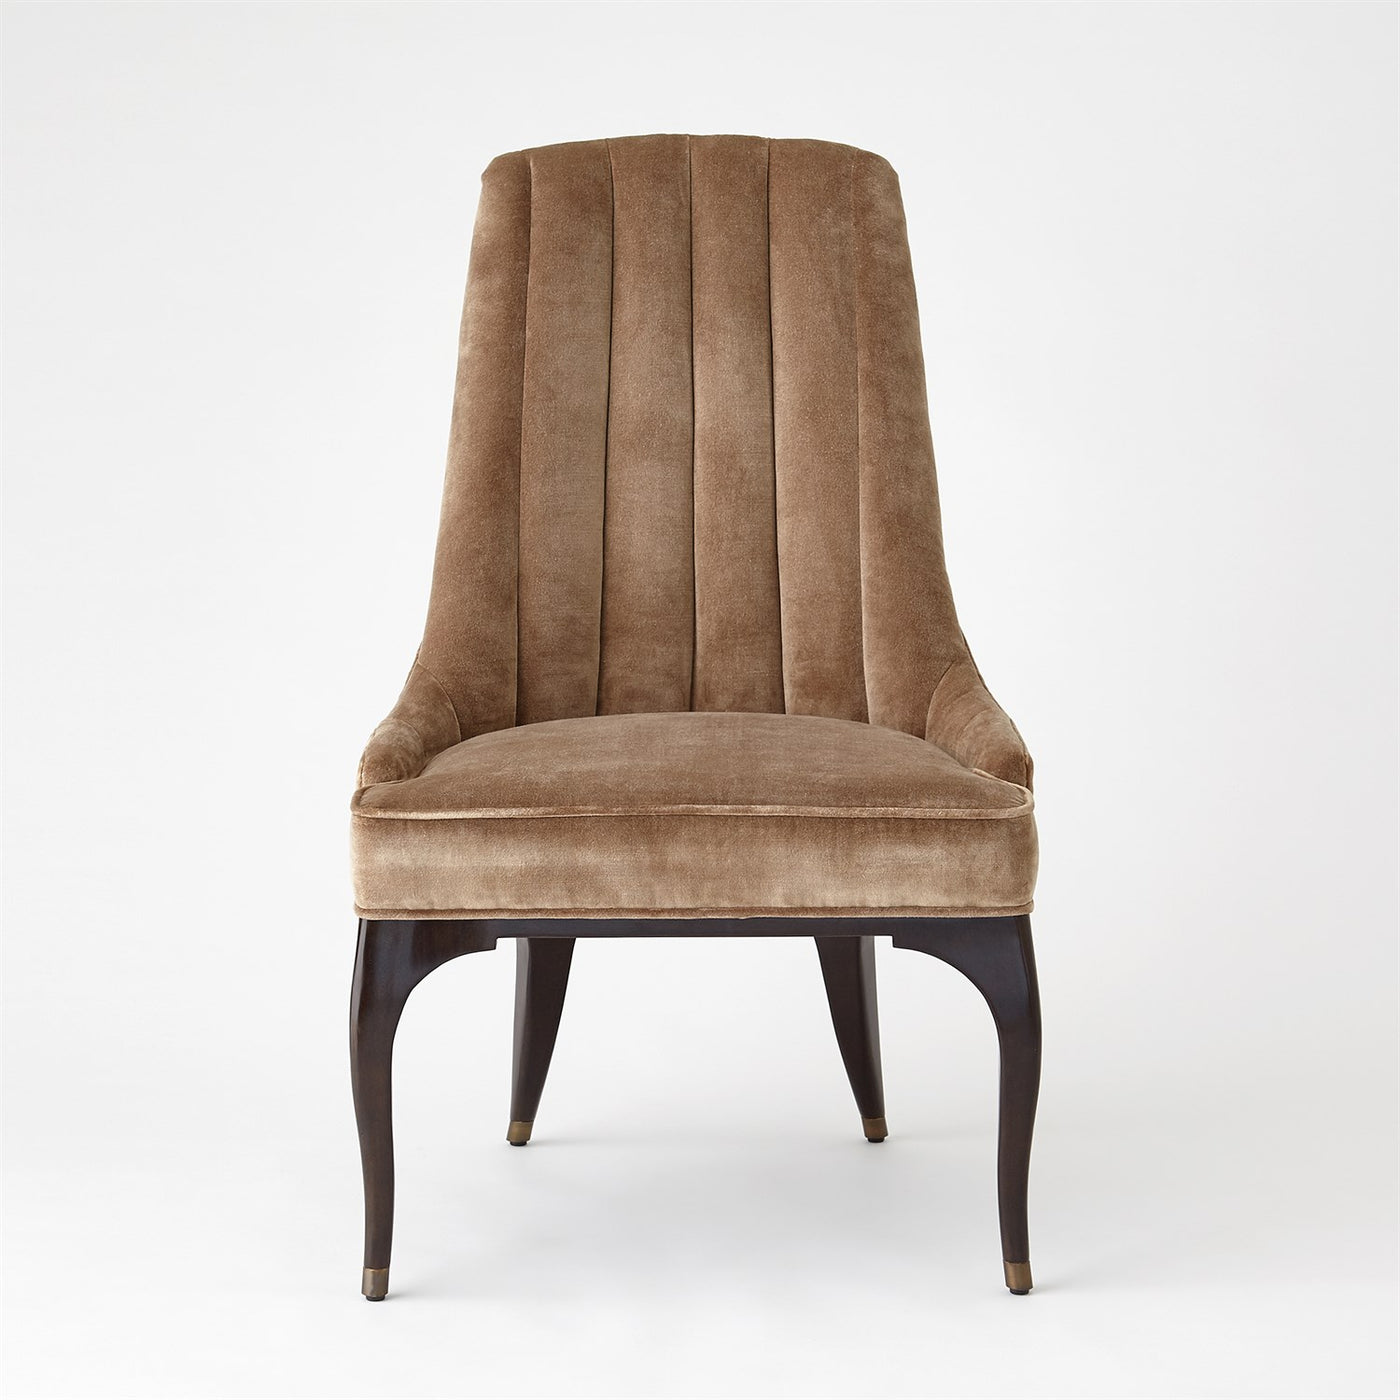 Channel Tufted Dining Chair-Mushroom by Global Views